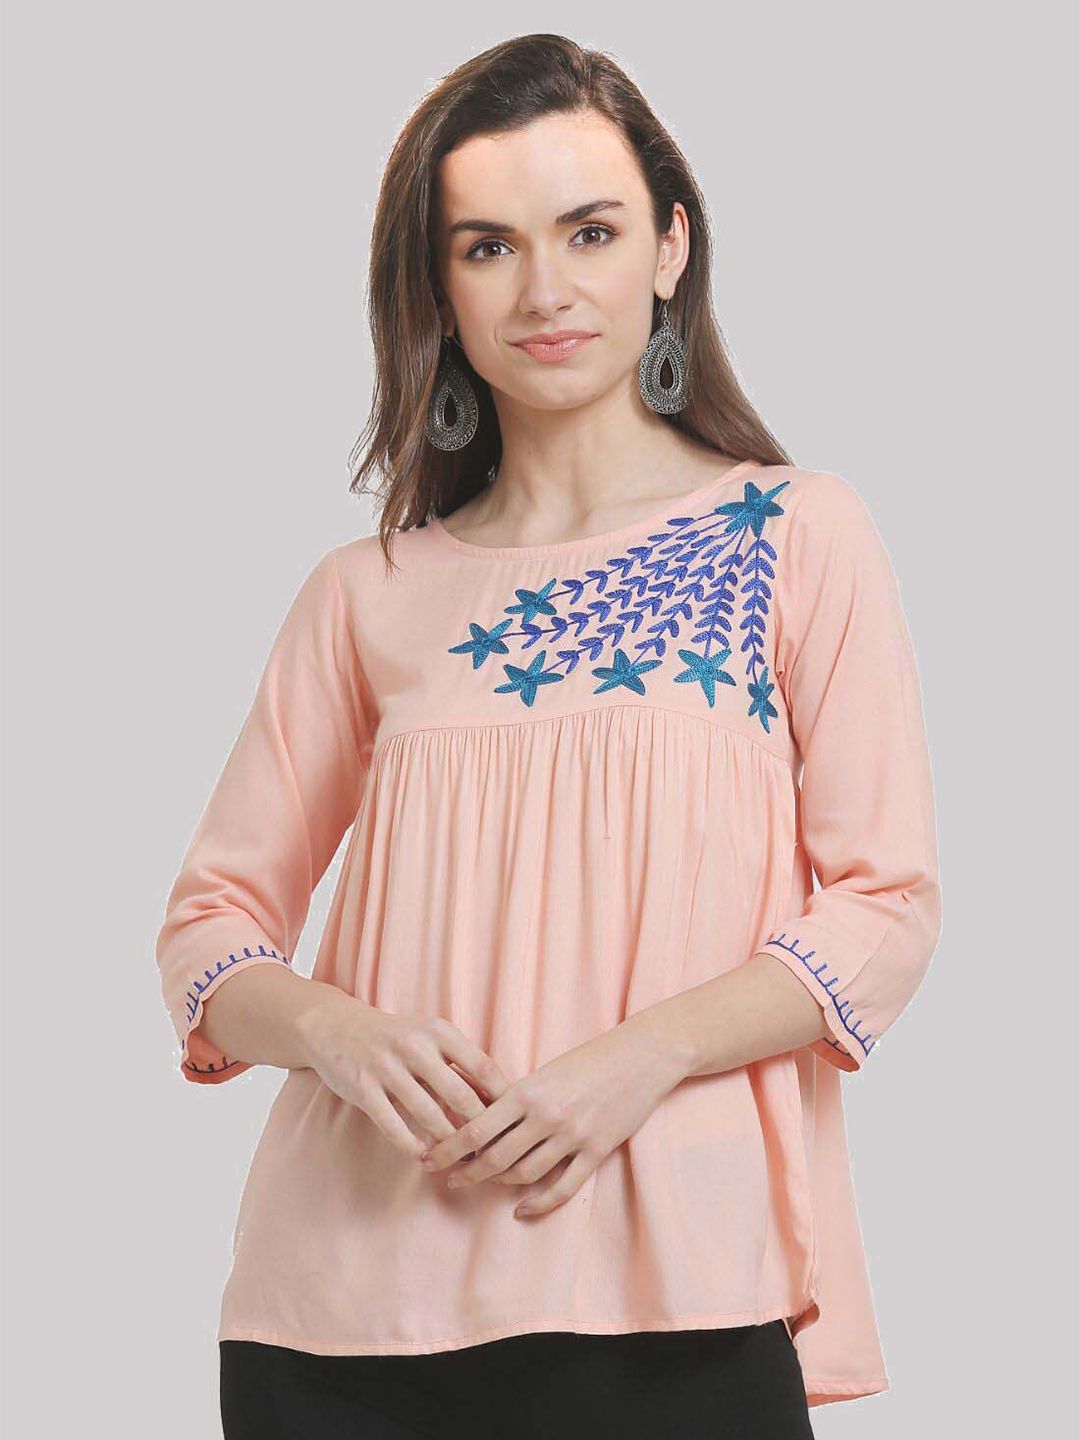 SAAKAA Peach-Coloured Floral Embroidered Top Price in India